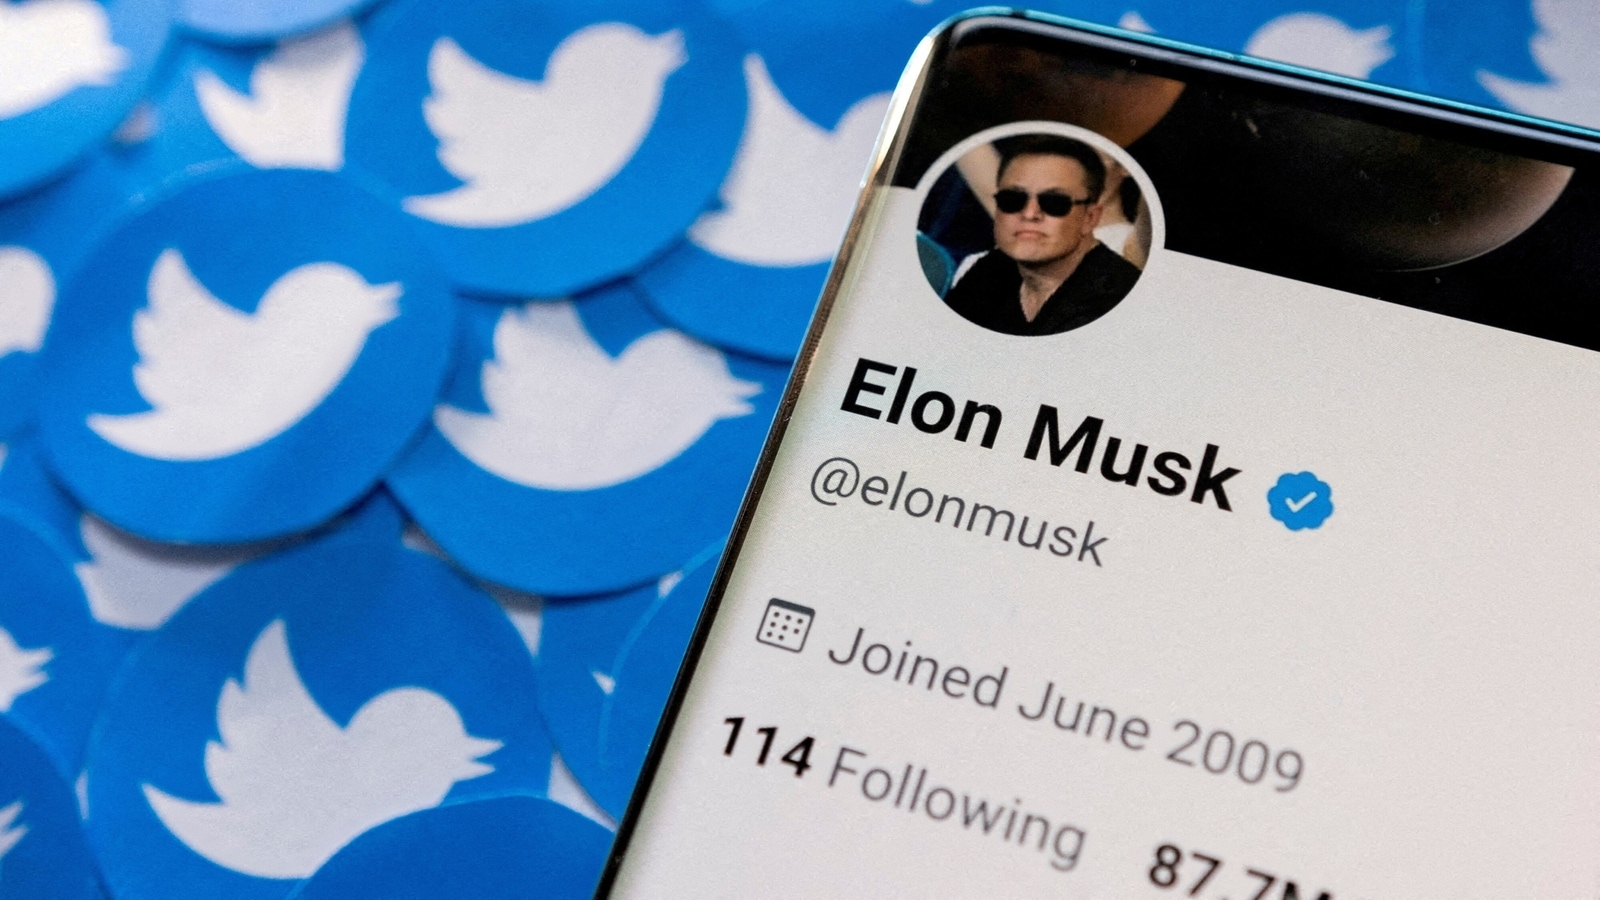 Twitter shares fall as Elon Musk takeover faces fresh questions